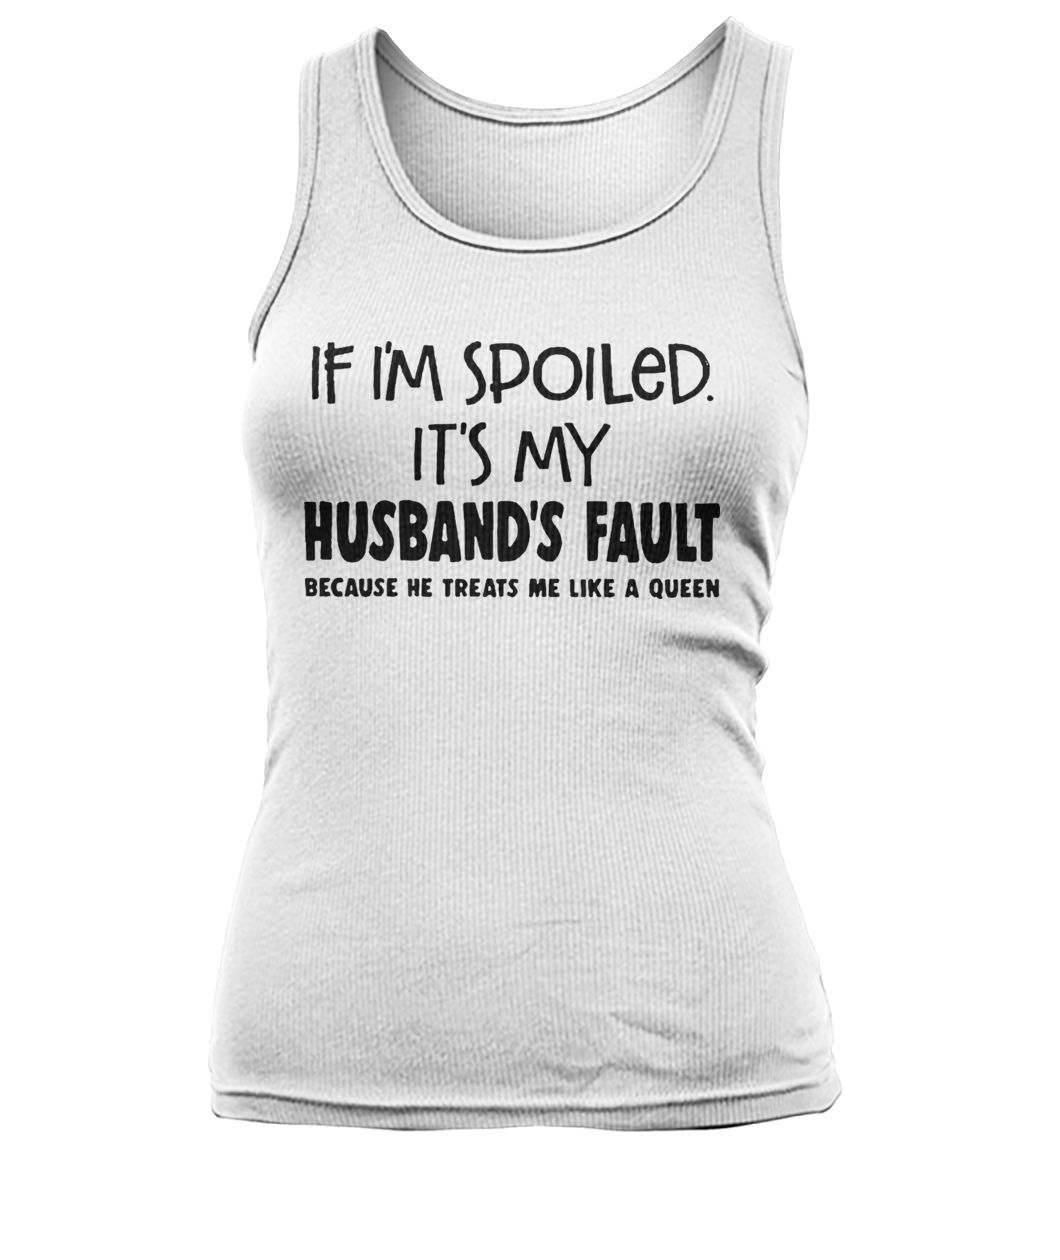 If I'm spoiled it's my husband's fault because he treats me like a queen women's tank top